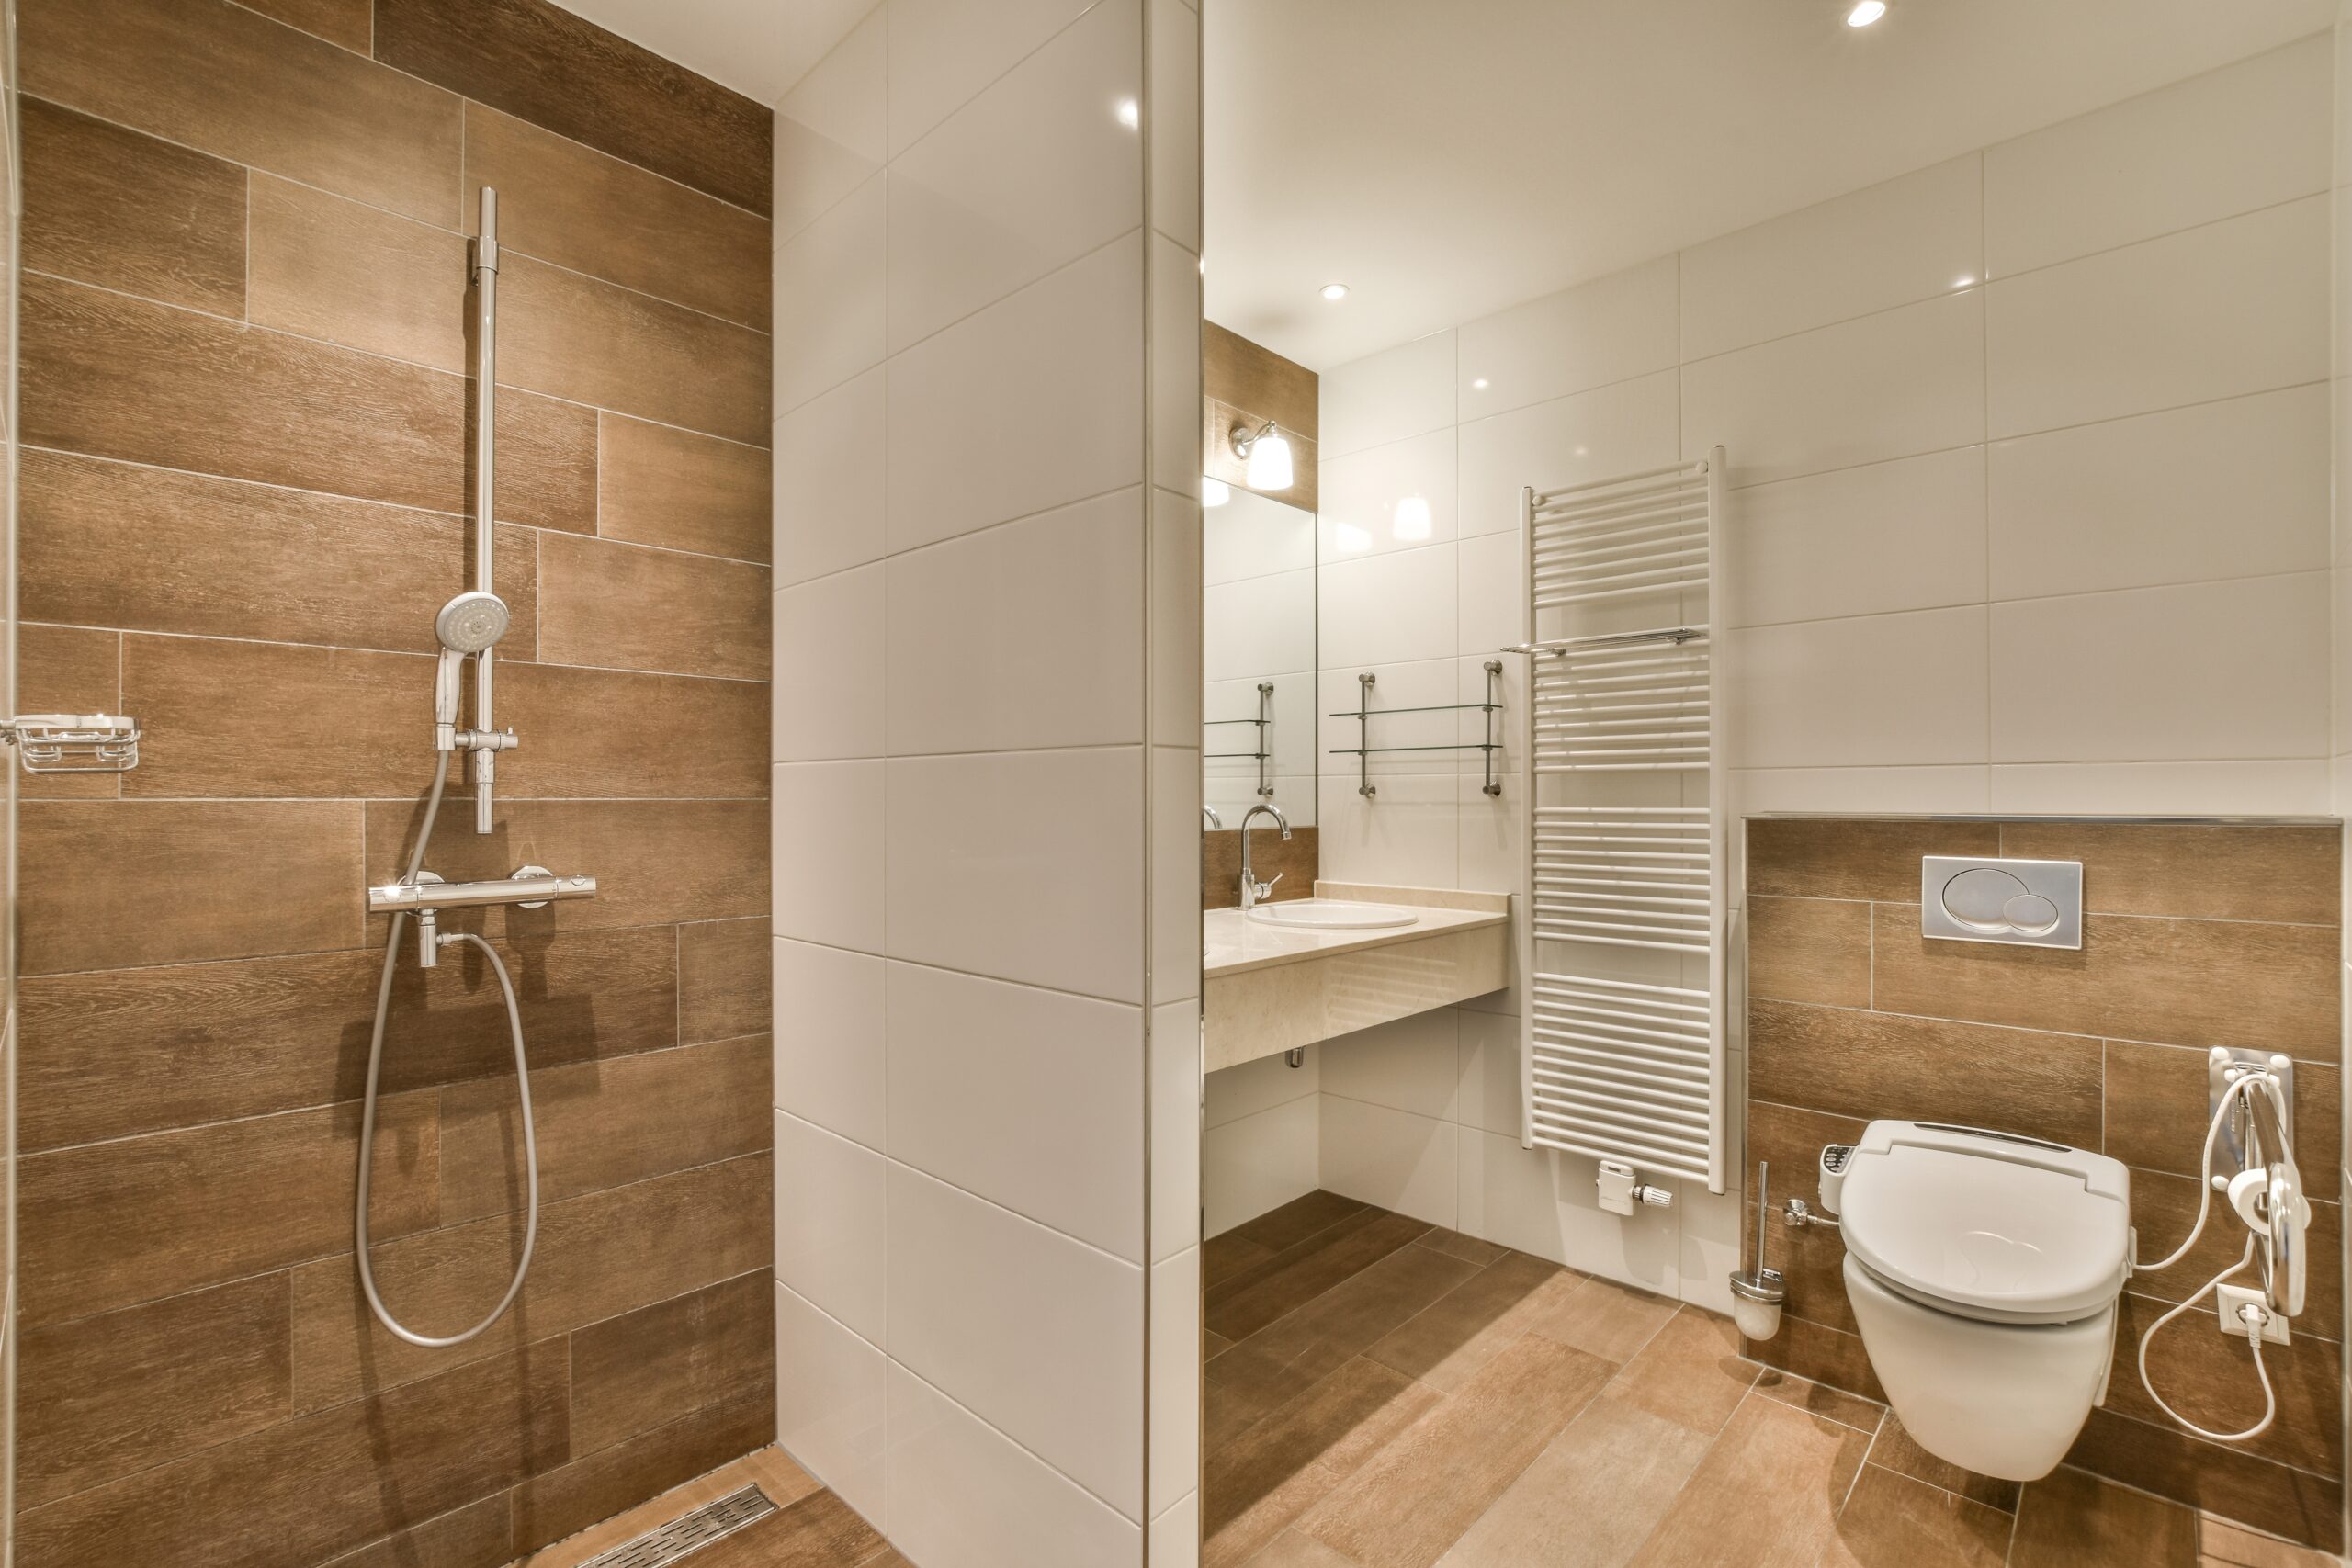 A,Modern,Bathroom,With,Wood,Flooring,And,White,Tiles,On